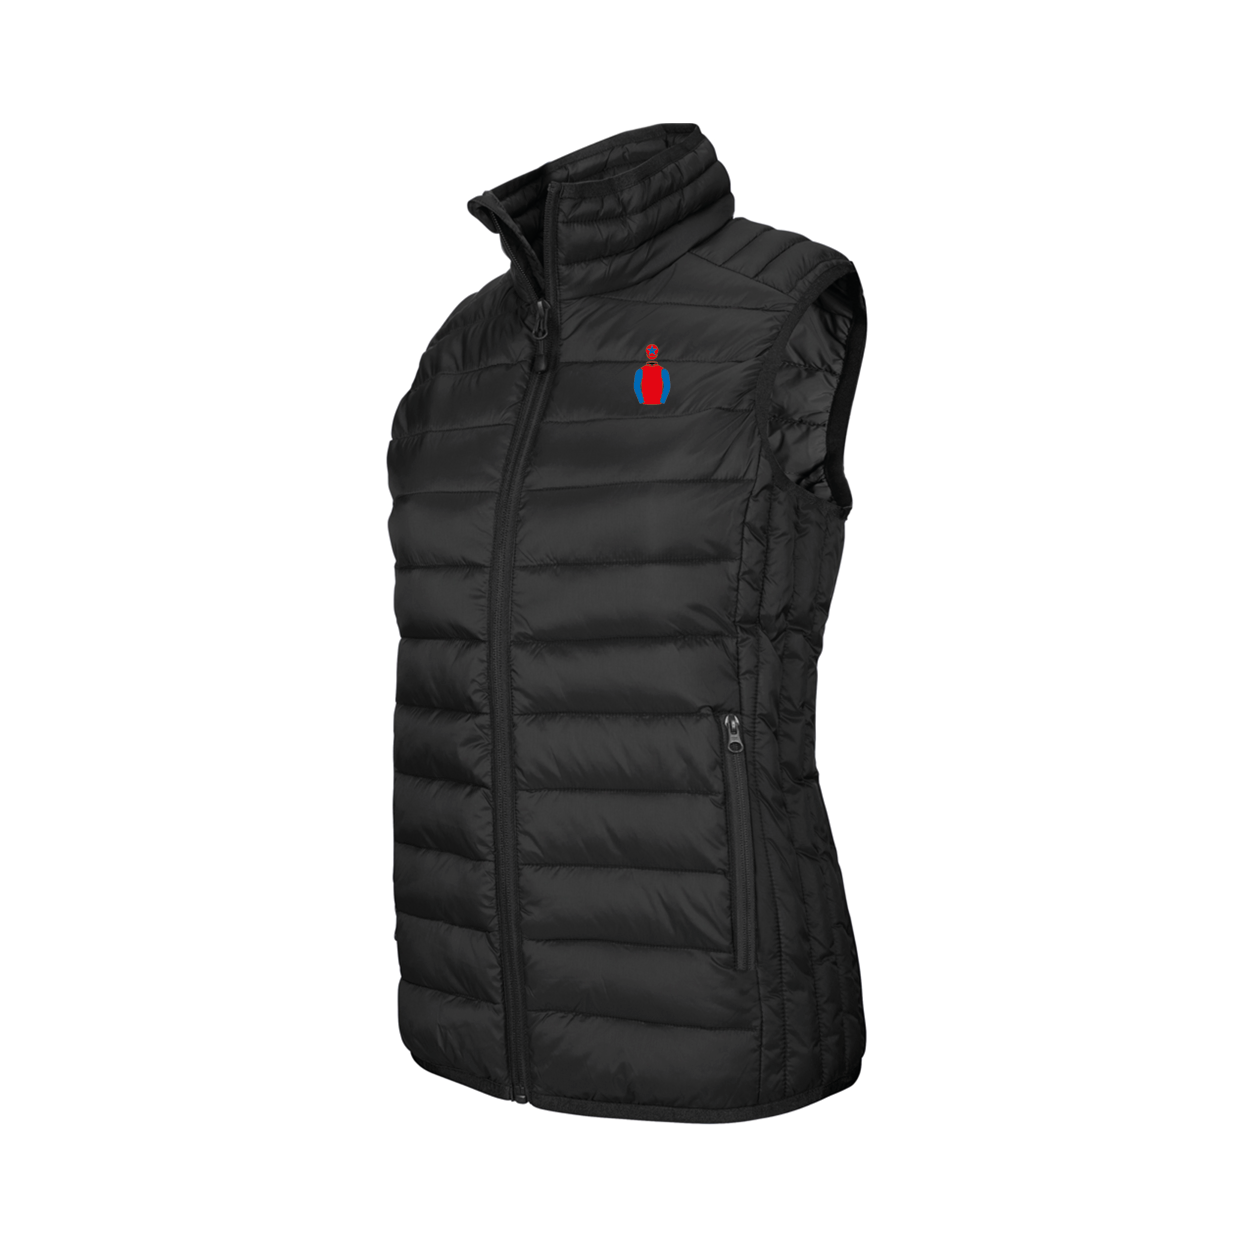 Ladies Hammer and Trowel Syndicate Embroidered Kariban Lightweight Bodywarmer - Clothing - Hacked Up